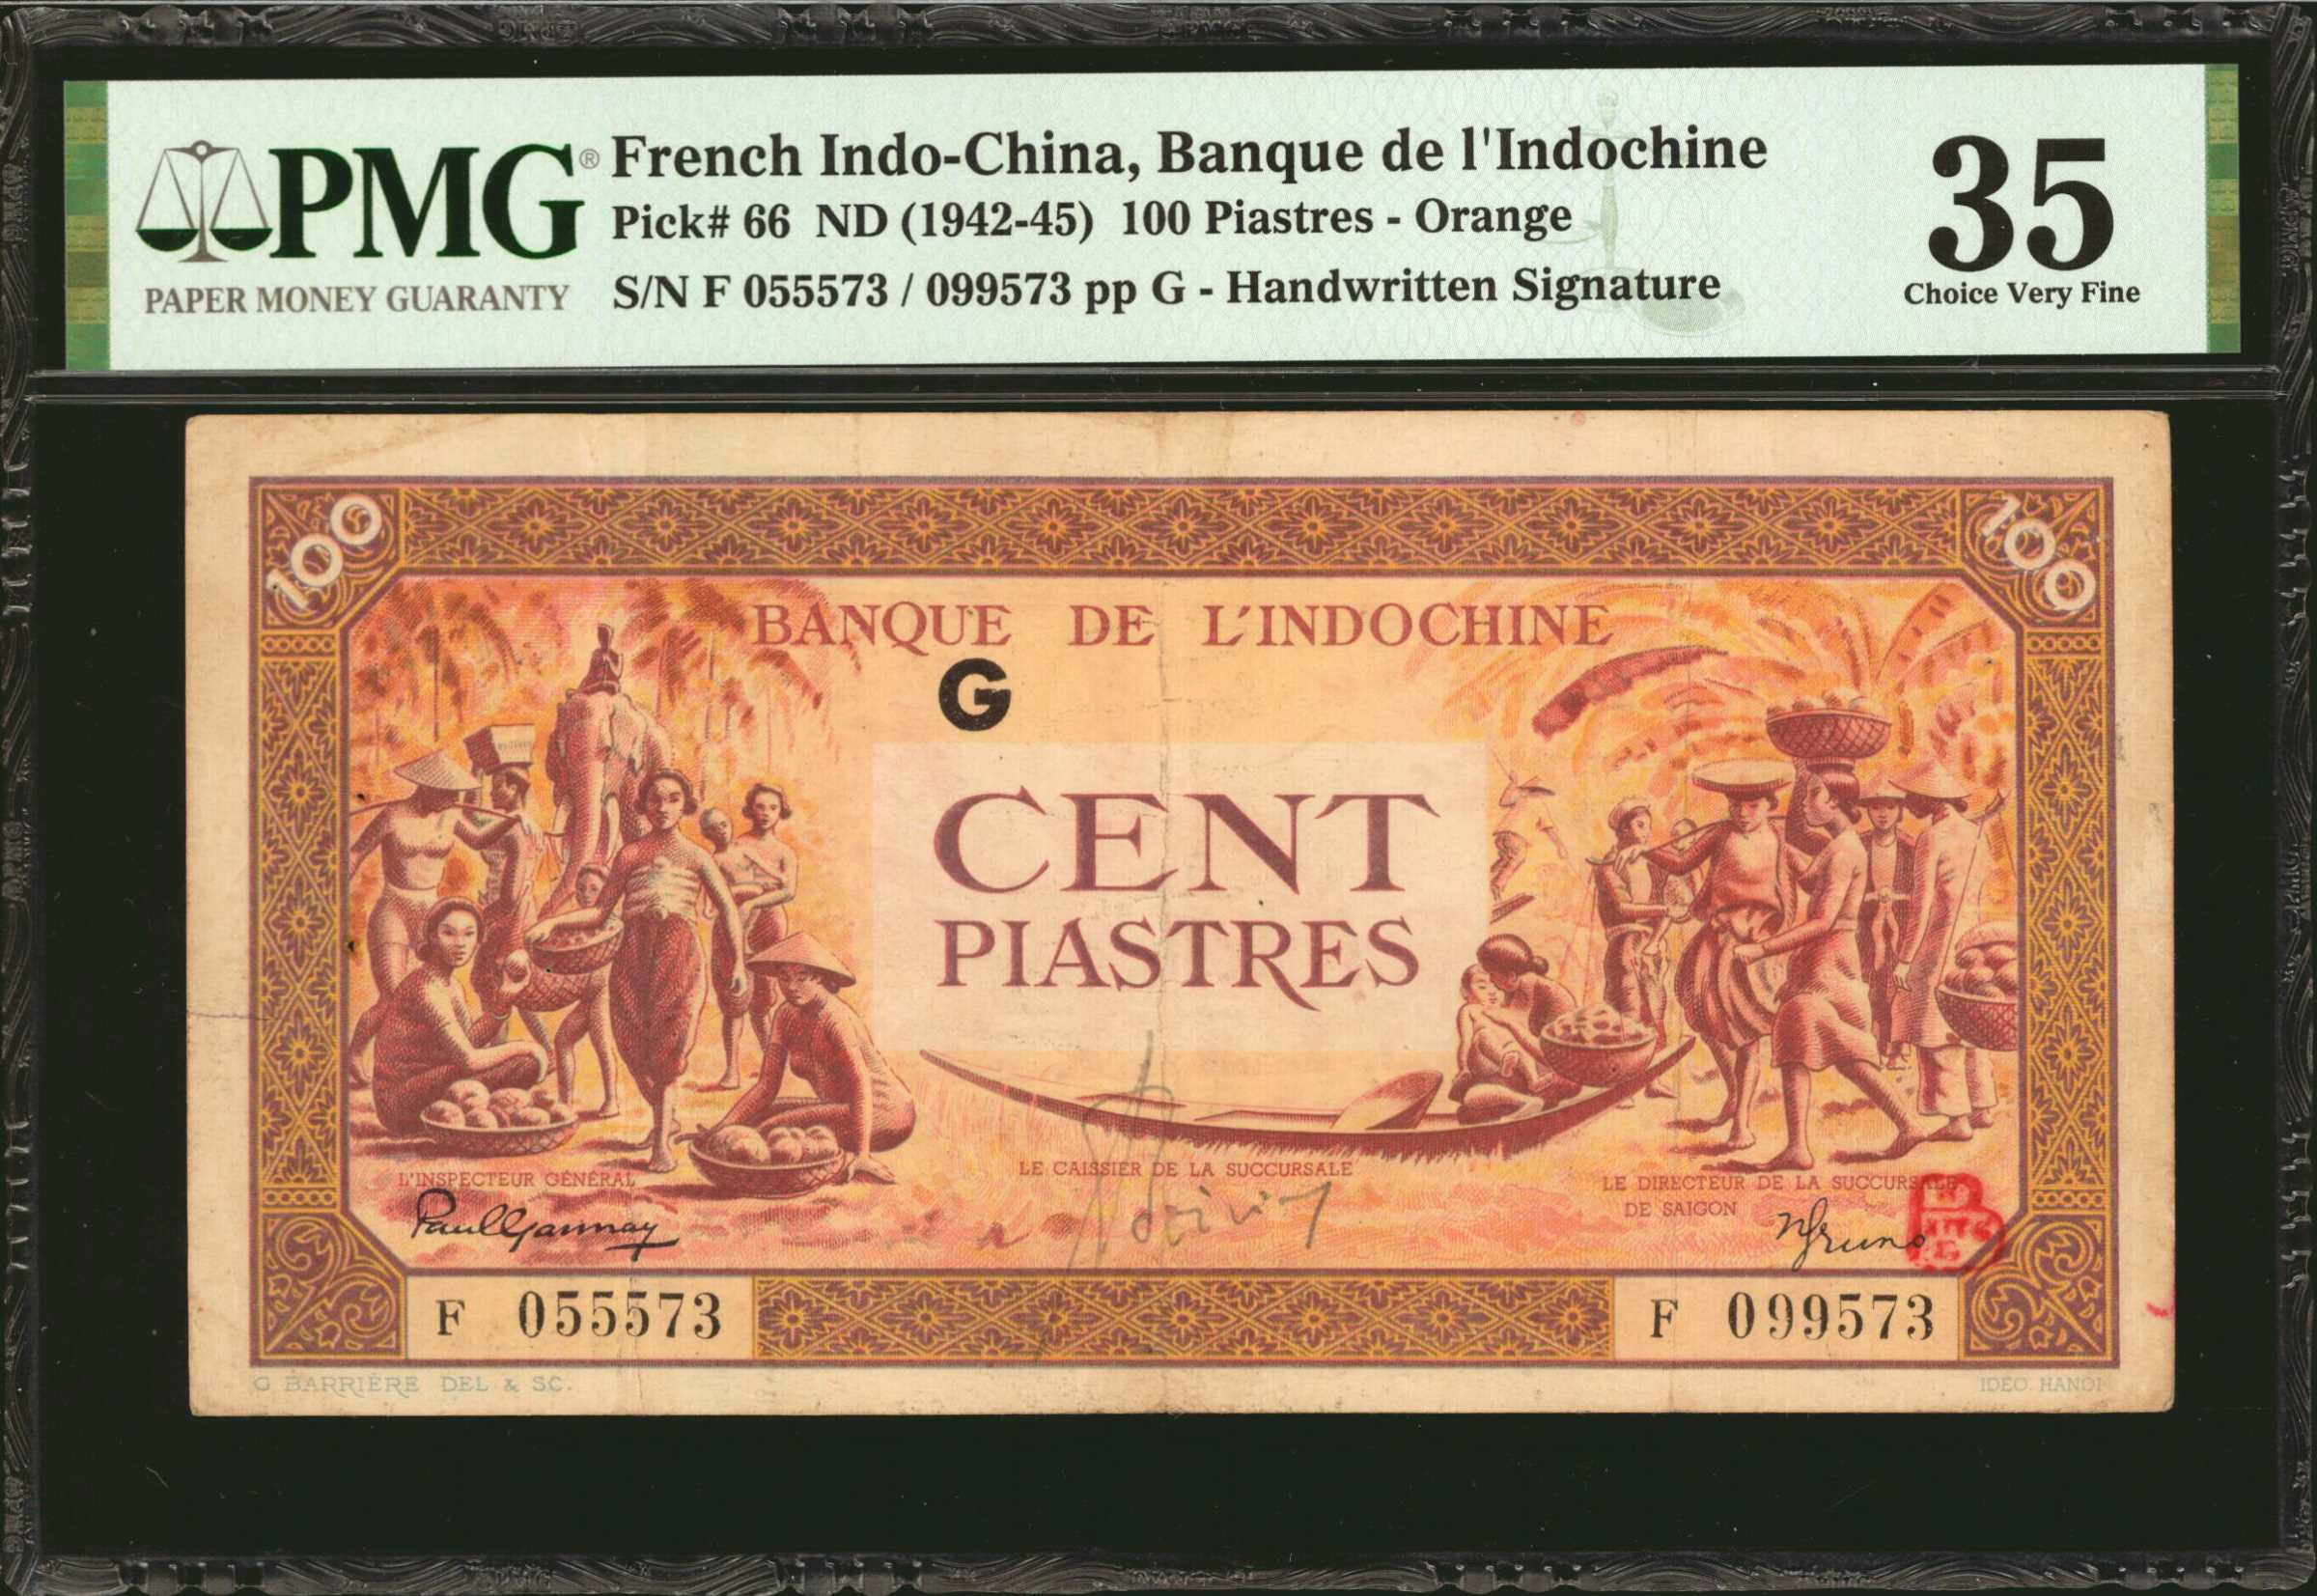 FRENCH INDO-CHINA. Banque de L'Indochine. 100 Piastres, ND (1942